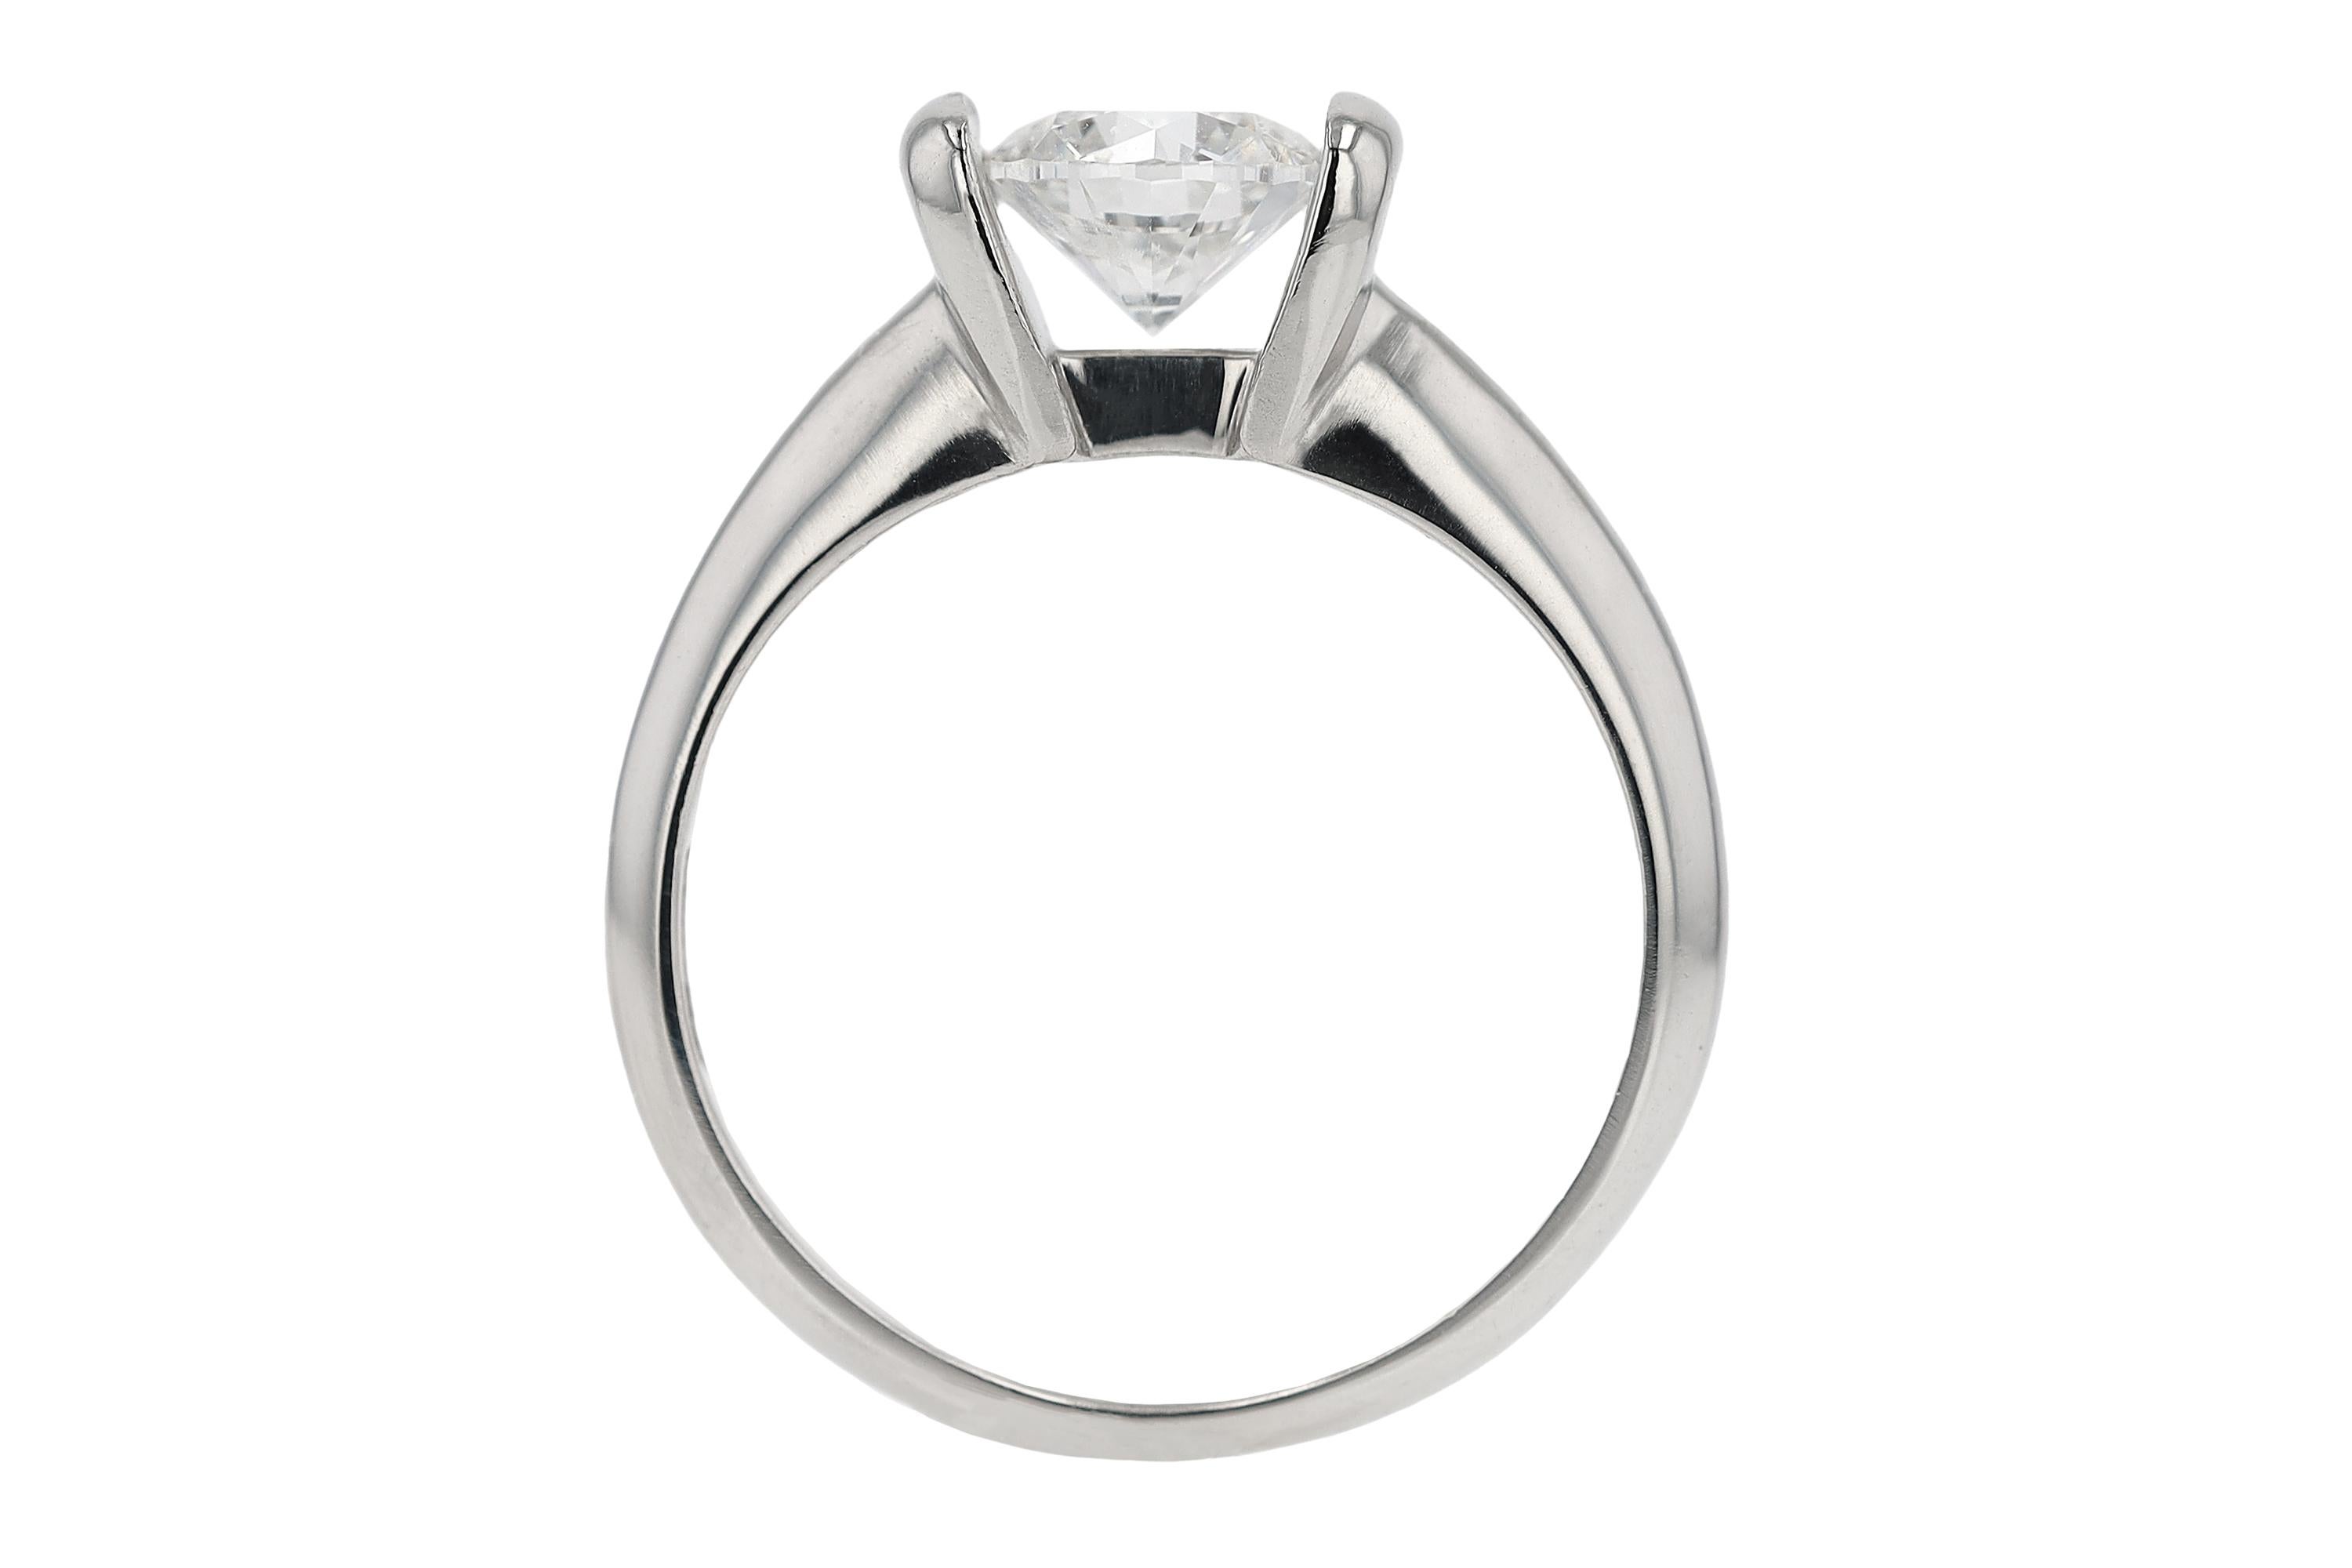 A magnificent solitaire engagement ring, vintage from the Scott Kay collection. Reflecting a minimalist design, the single stone setting centers on a 1 carat natural diamond, certified by the International Gemological Institute as E color